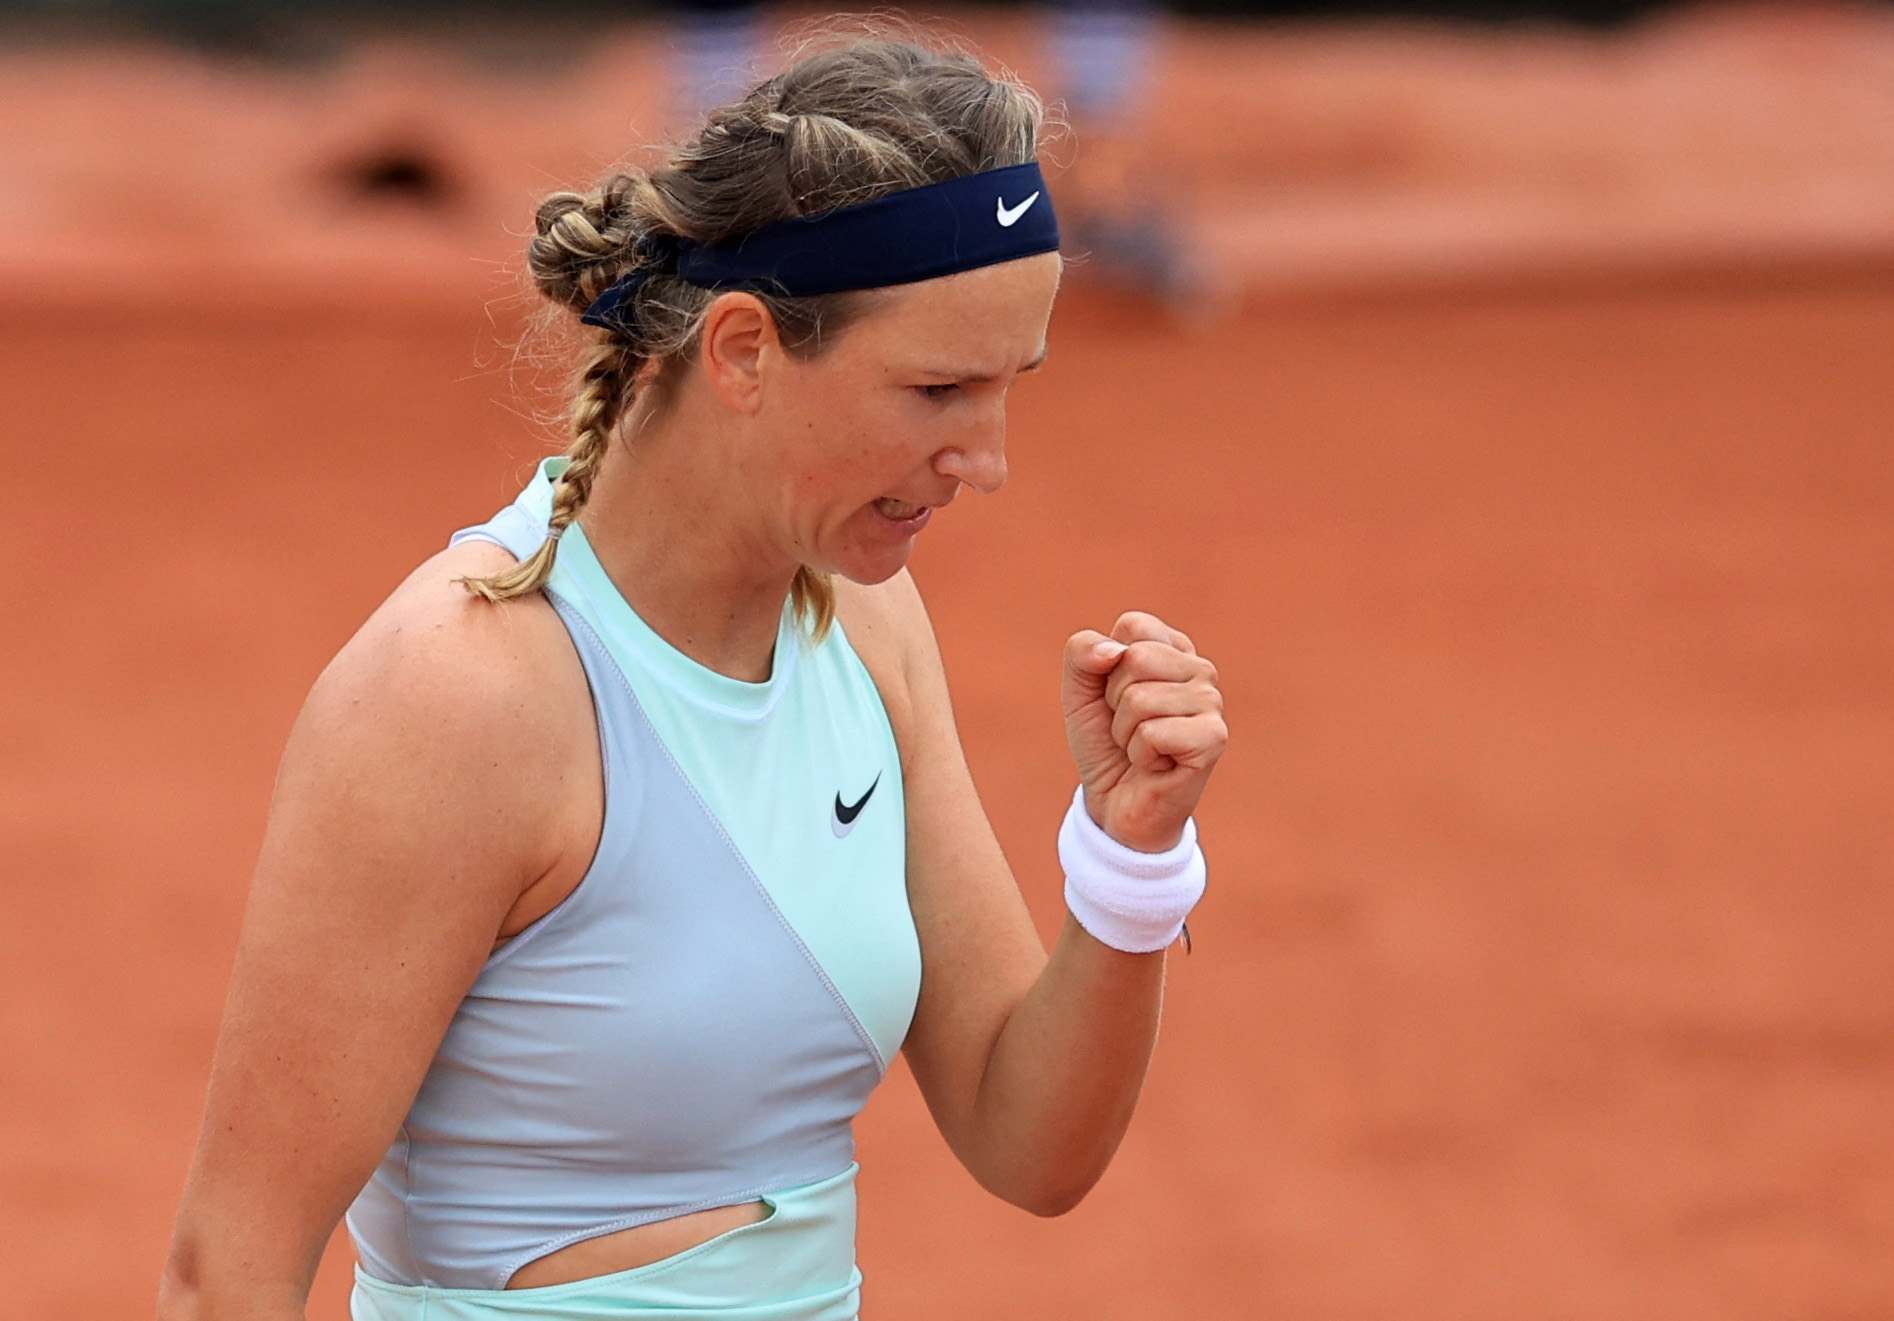 Blame Canada - Victoria Azarenka forced to withdraw from tournament in Toronto due to visa issues